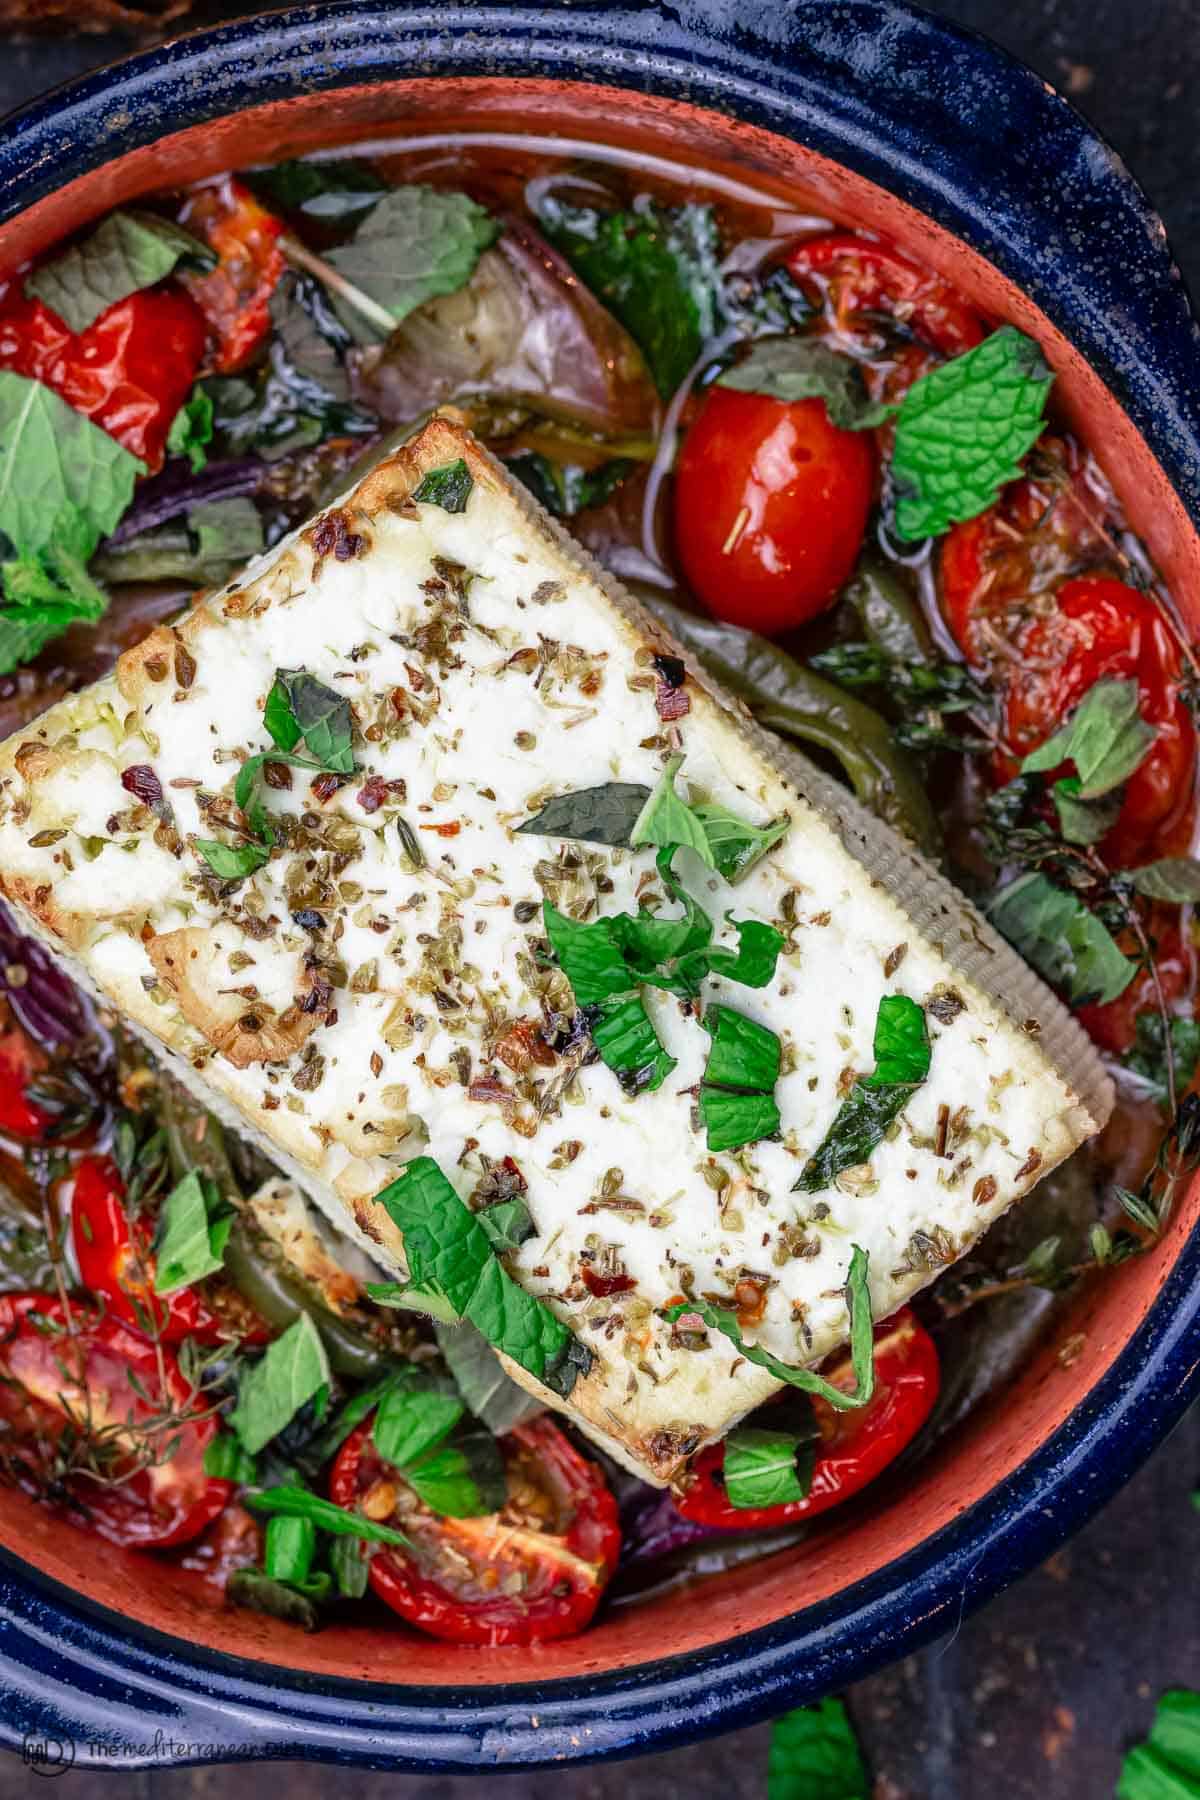 Baked feta with tomatoes, peppers and herbs in a baking dish